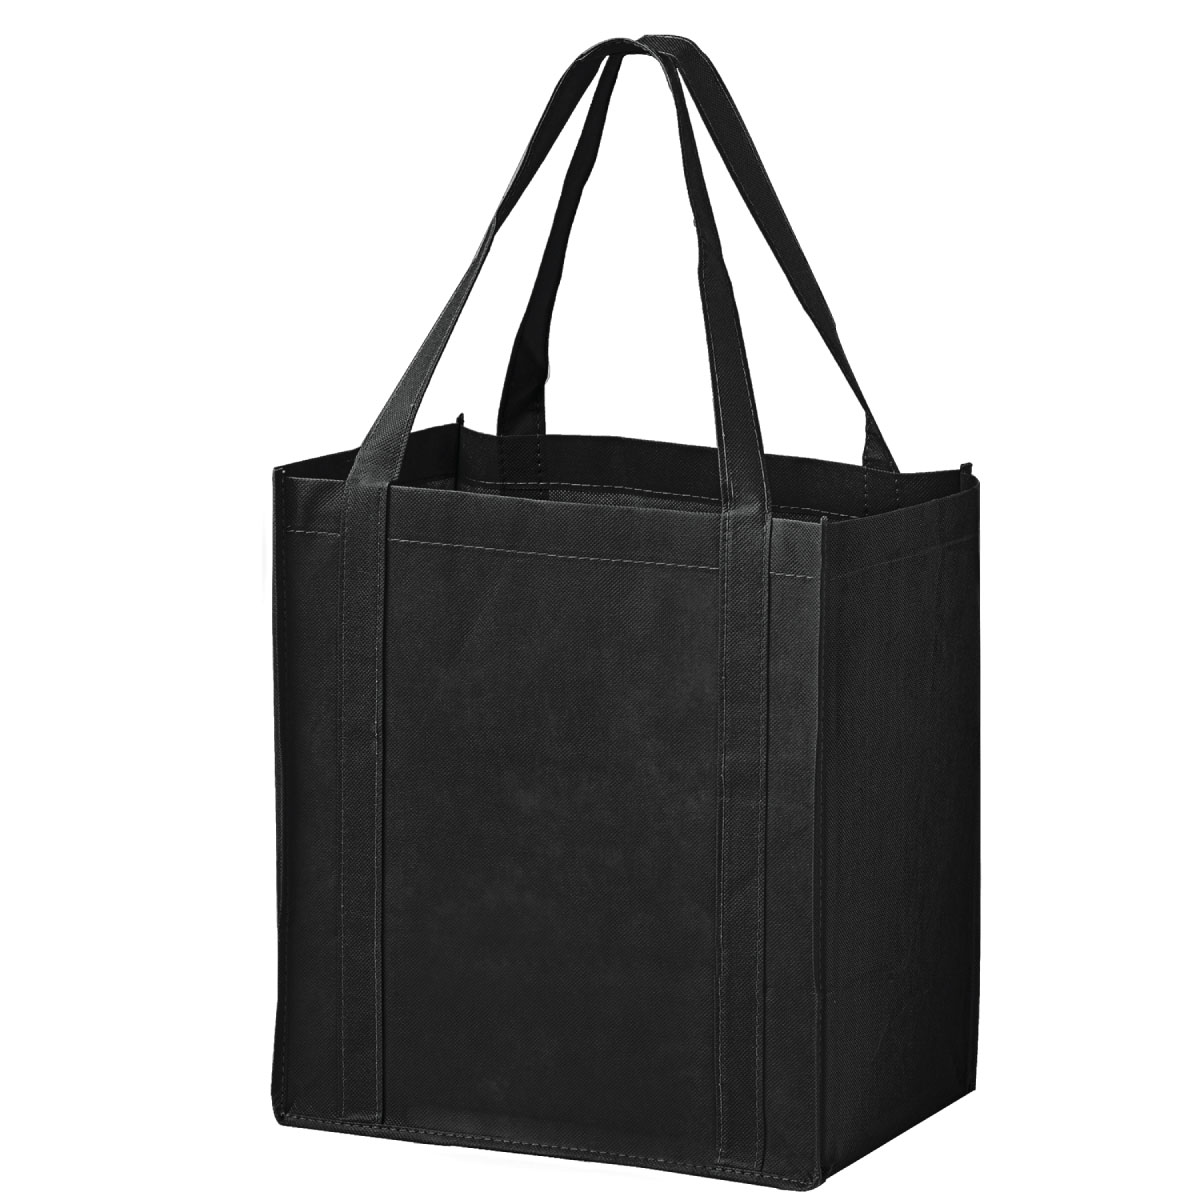 Black Recession Buster Grocery Bag (12”W x 8”G x 13”H) - Full Color